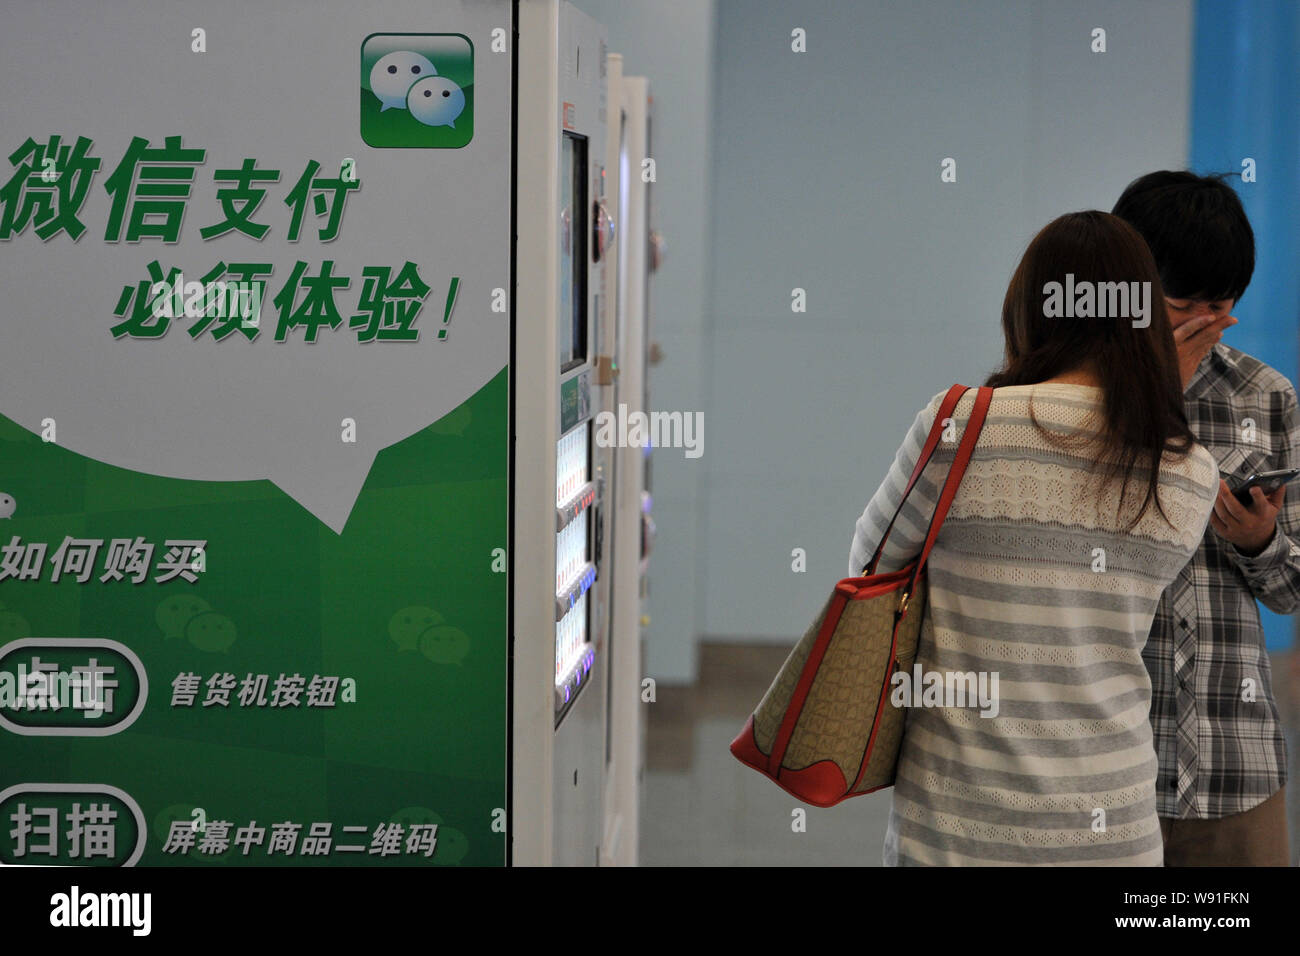 Chinese customers buy bottled drinks on a vending machine within the Wechat app in a subway station in Beijing, China, 26 September 2013.   WeChat use Stock Photo